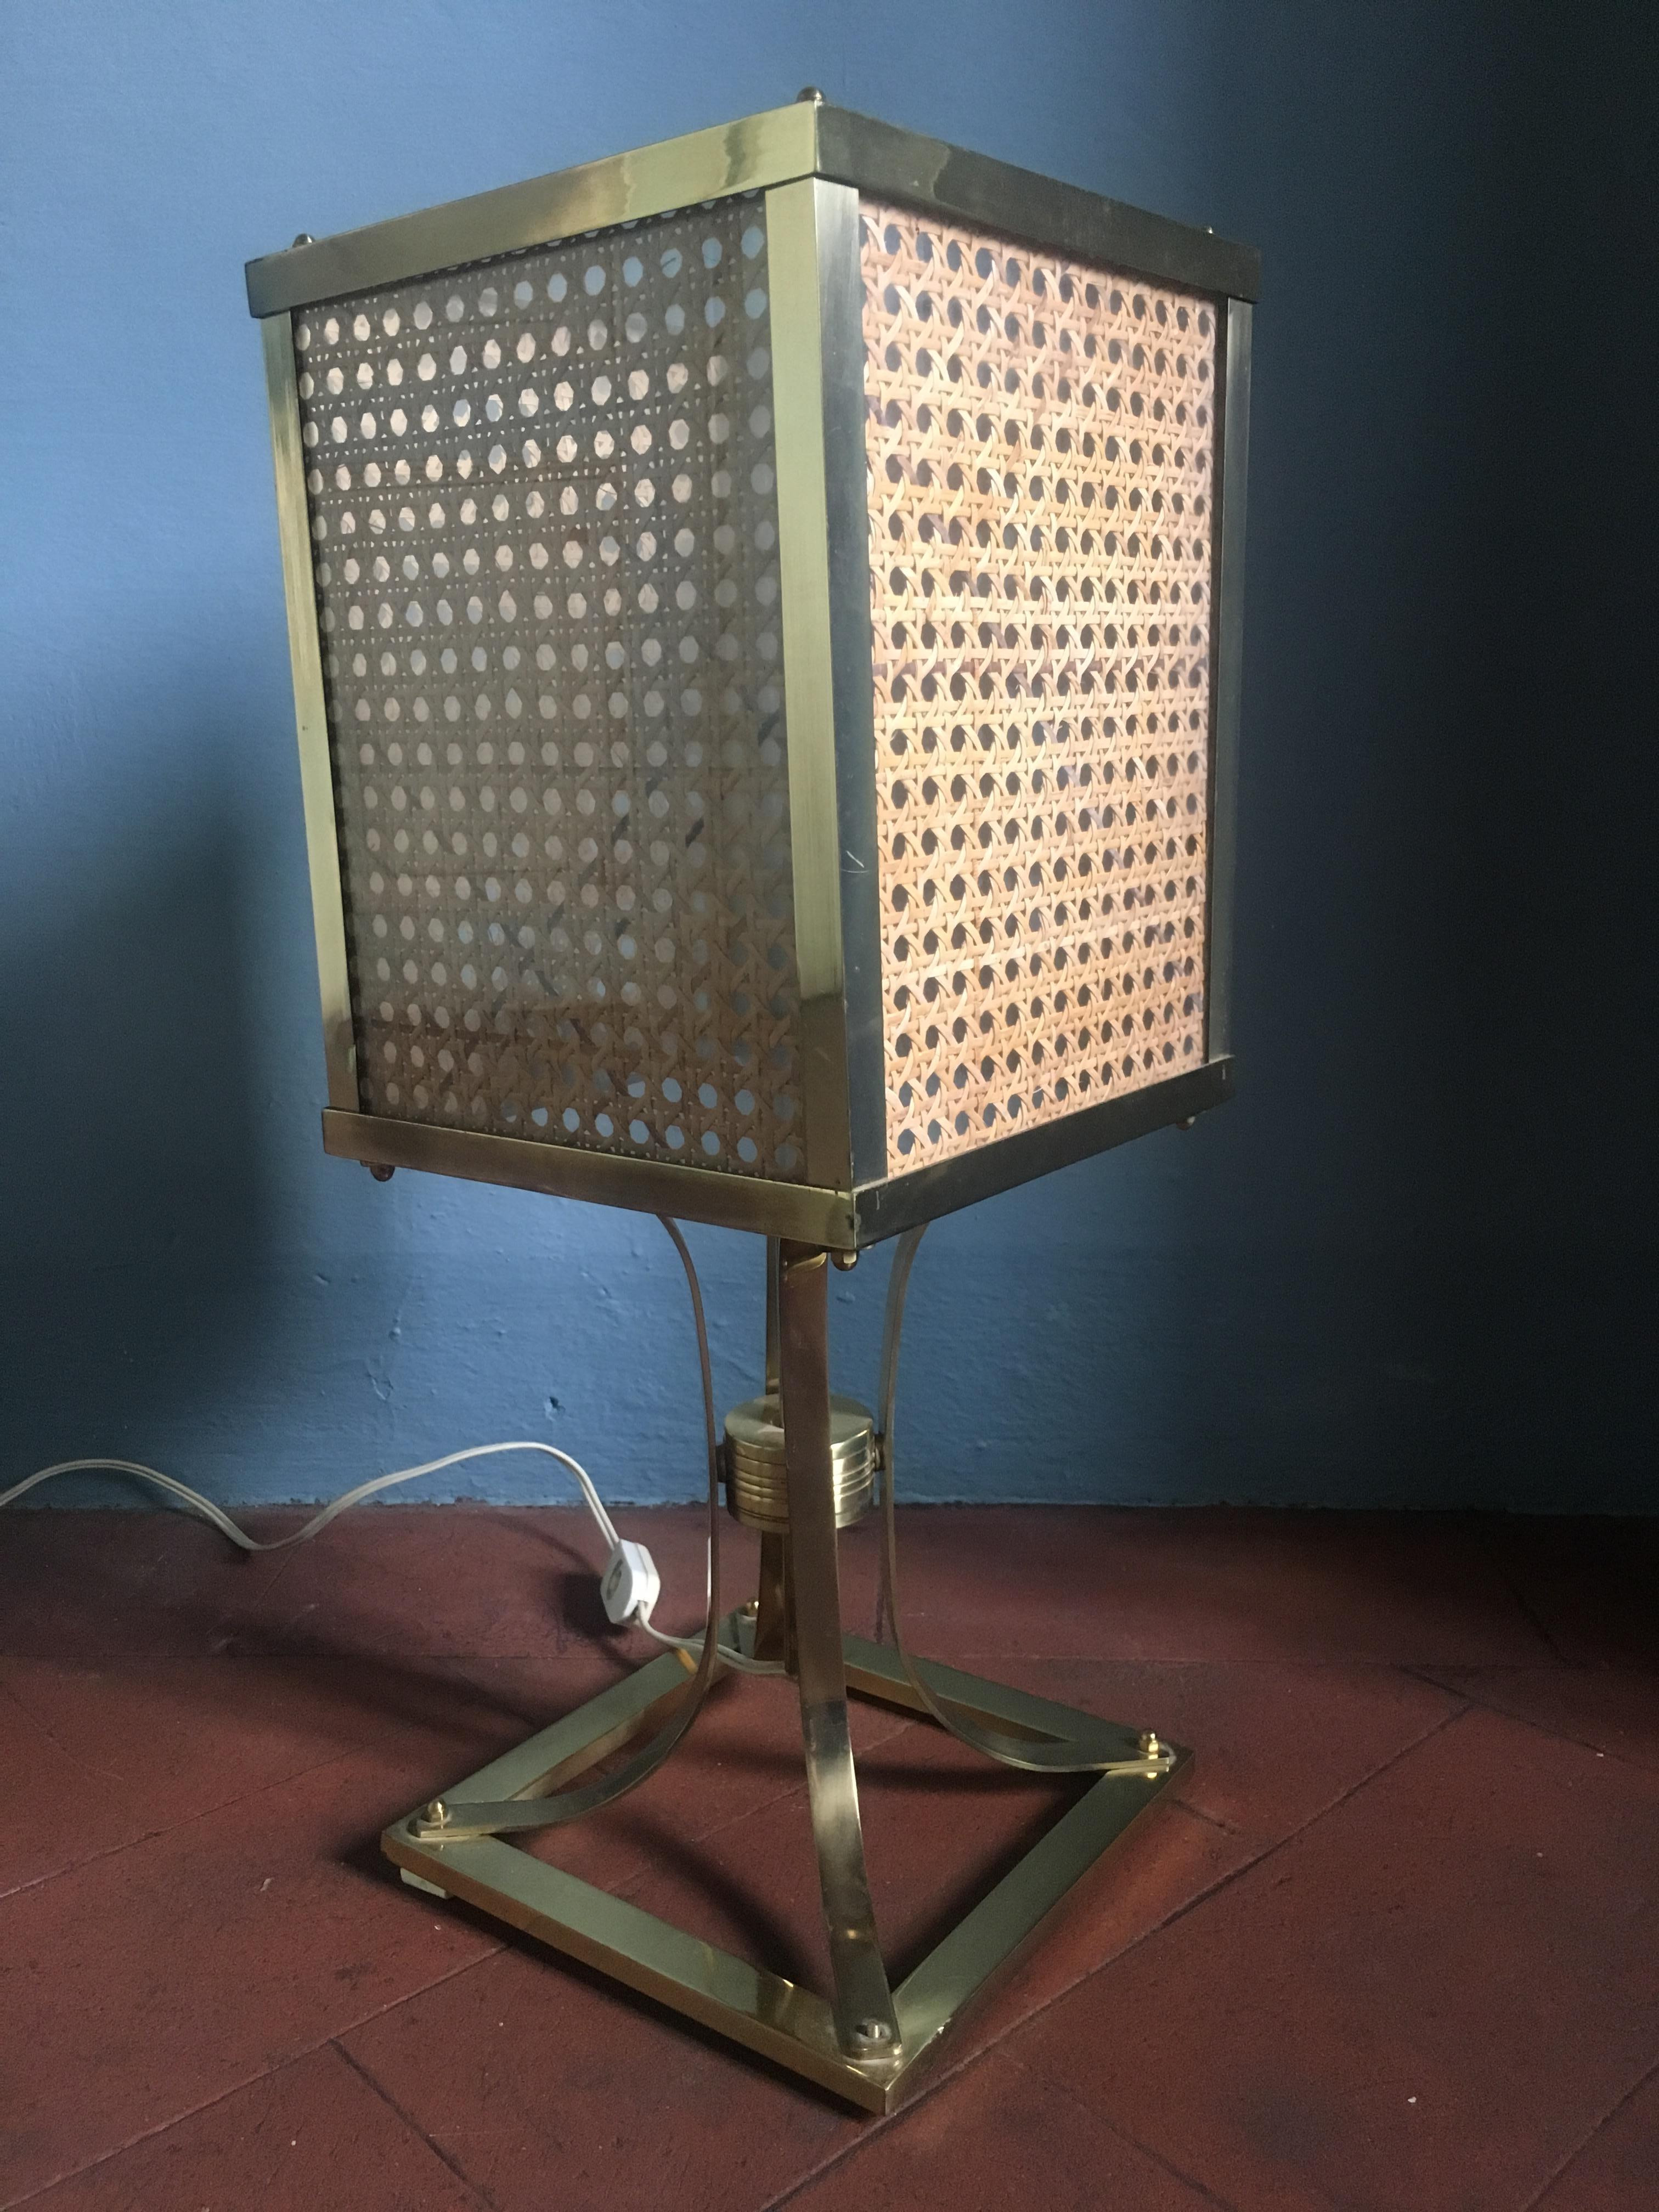 Mid-Century Modern Italian brass table lamp.
The lampshade of this table lamp has made in 